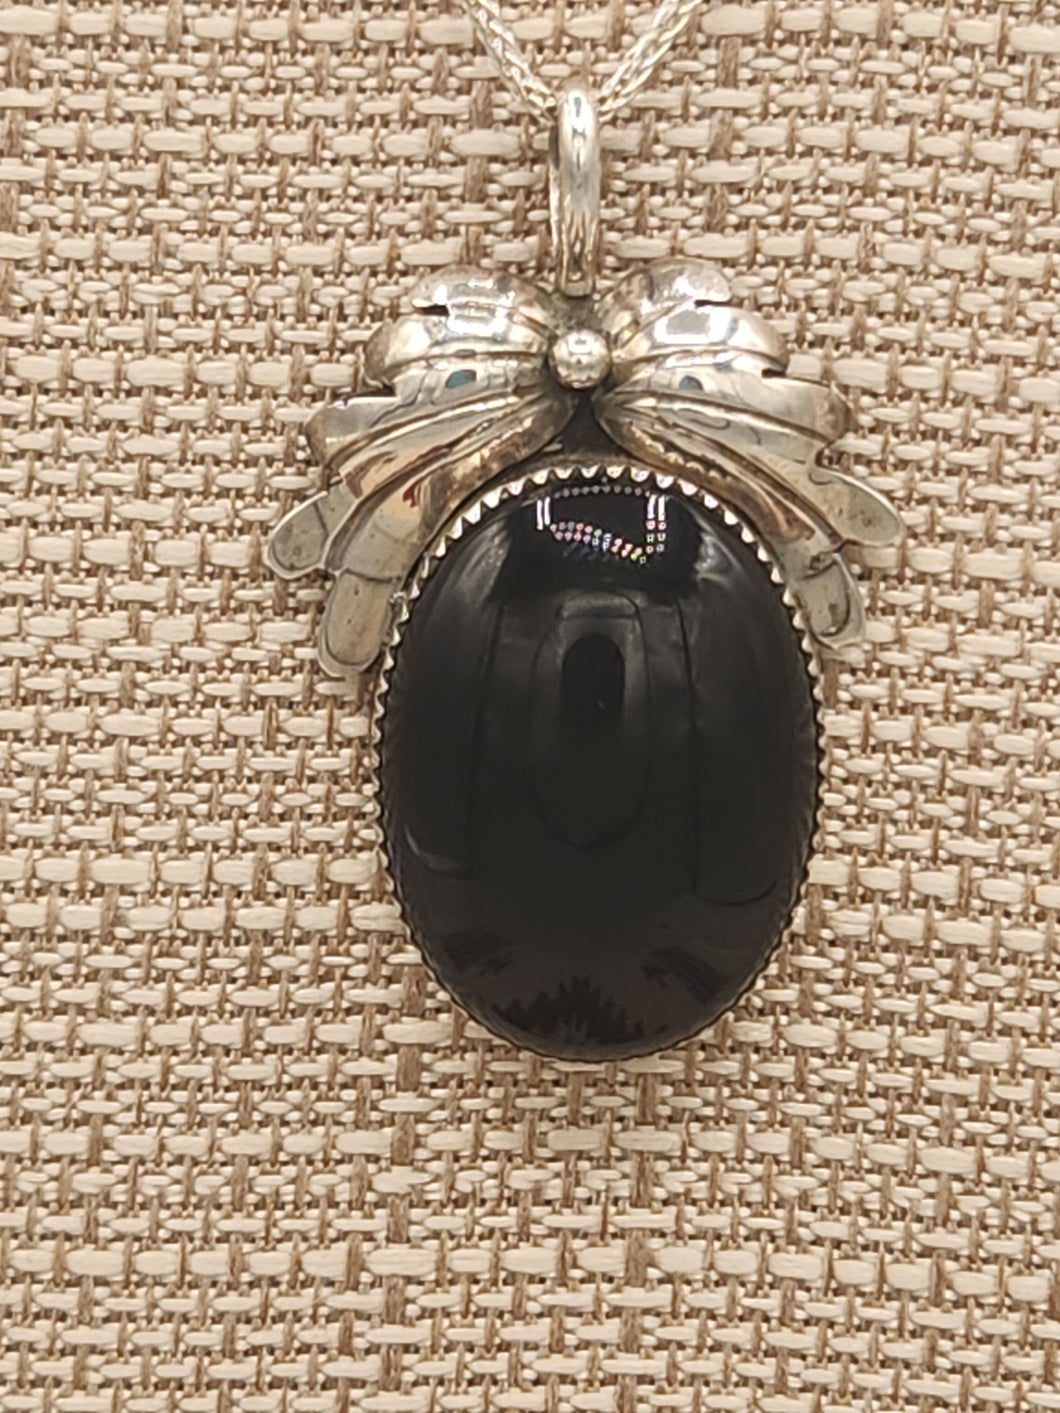 ONYX NECKLACE  - N.S.